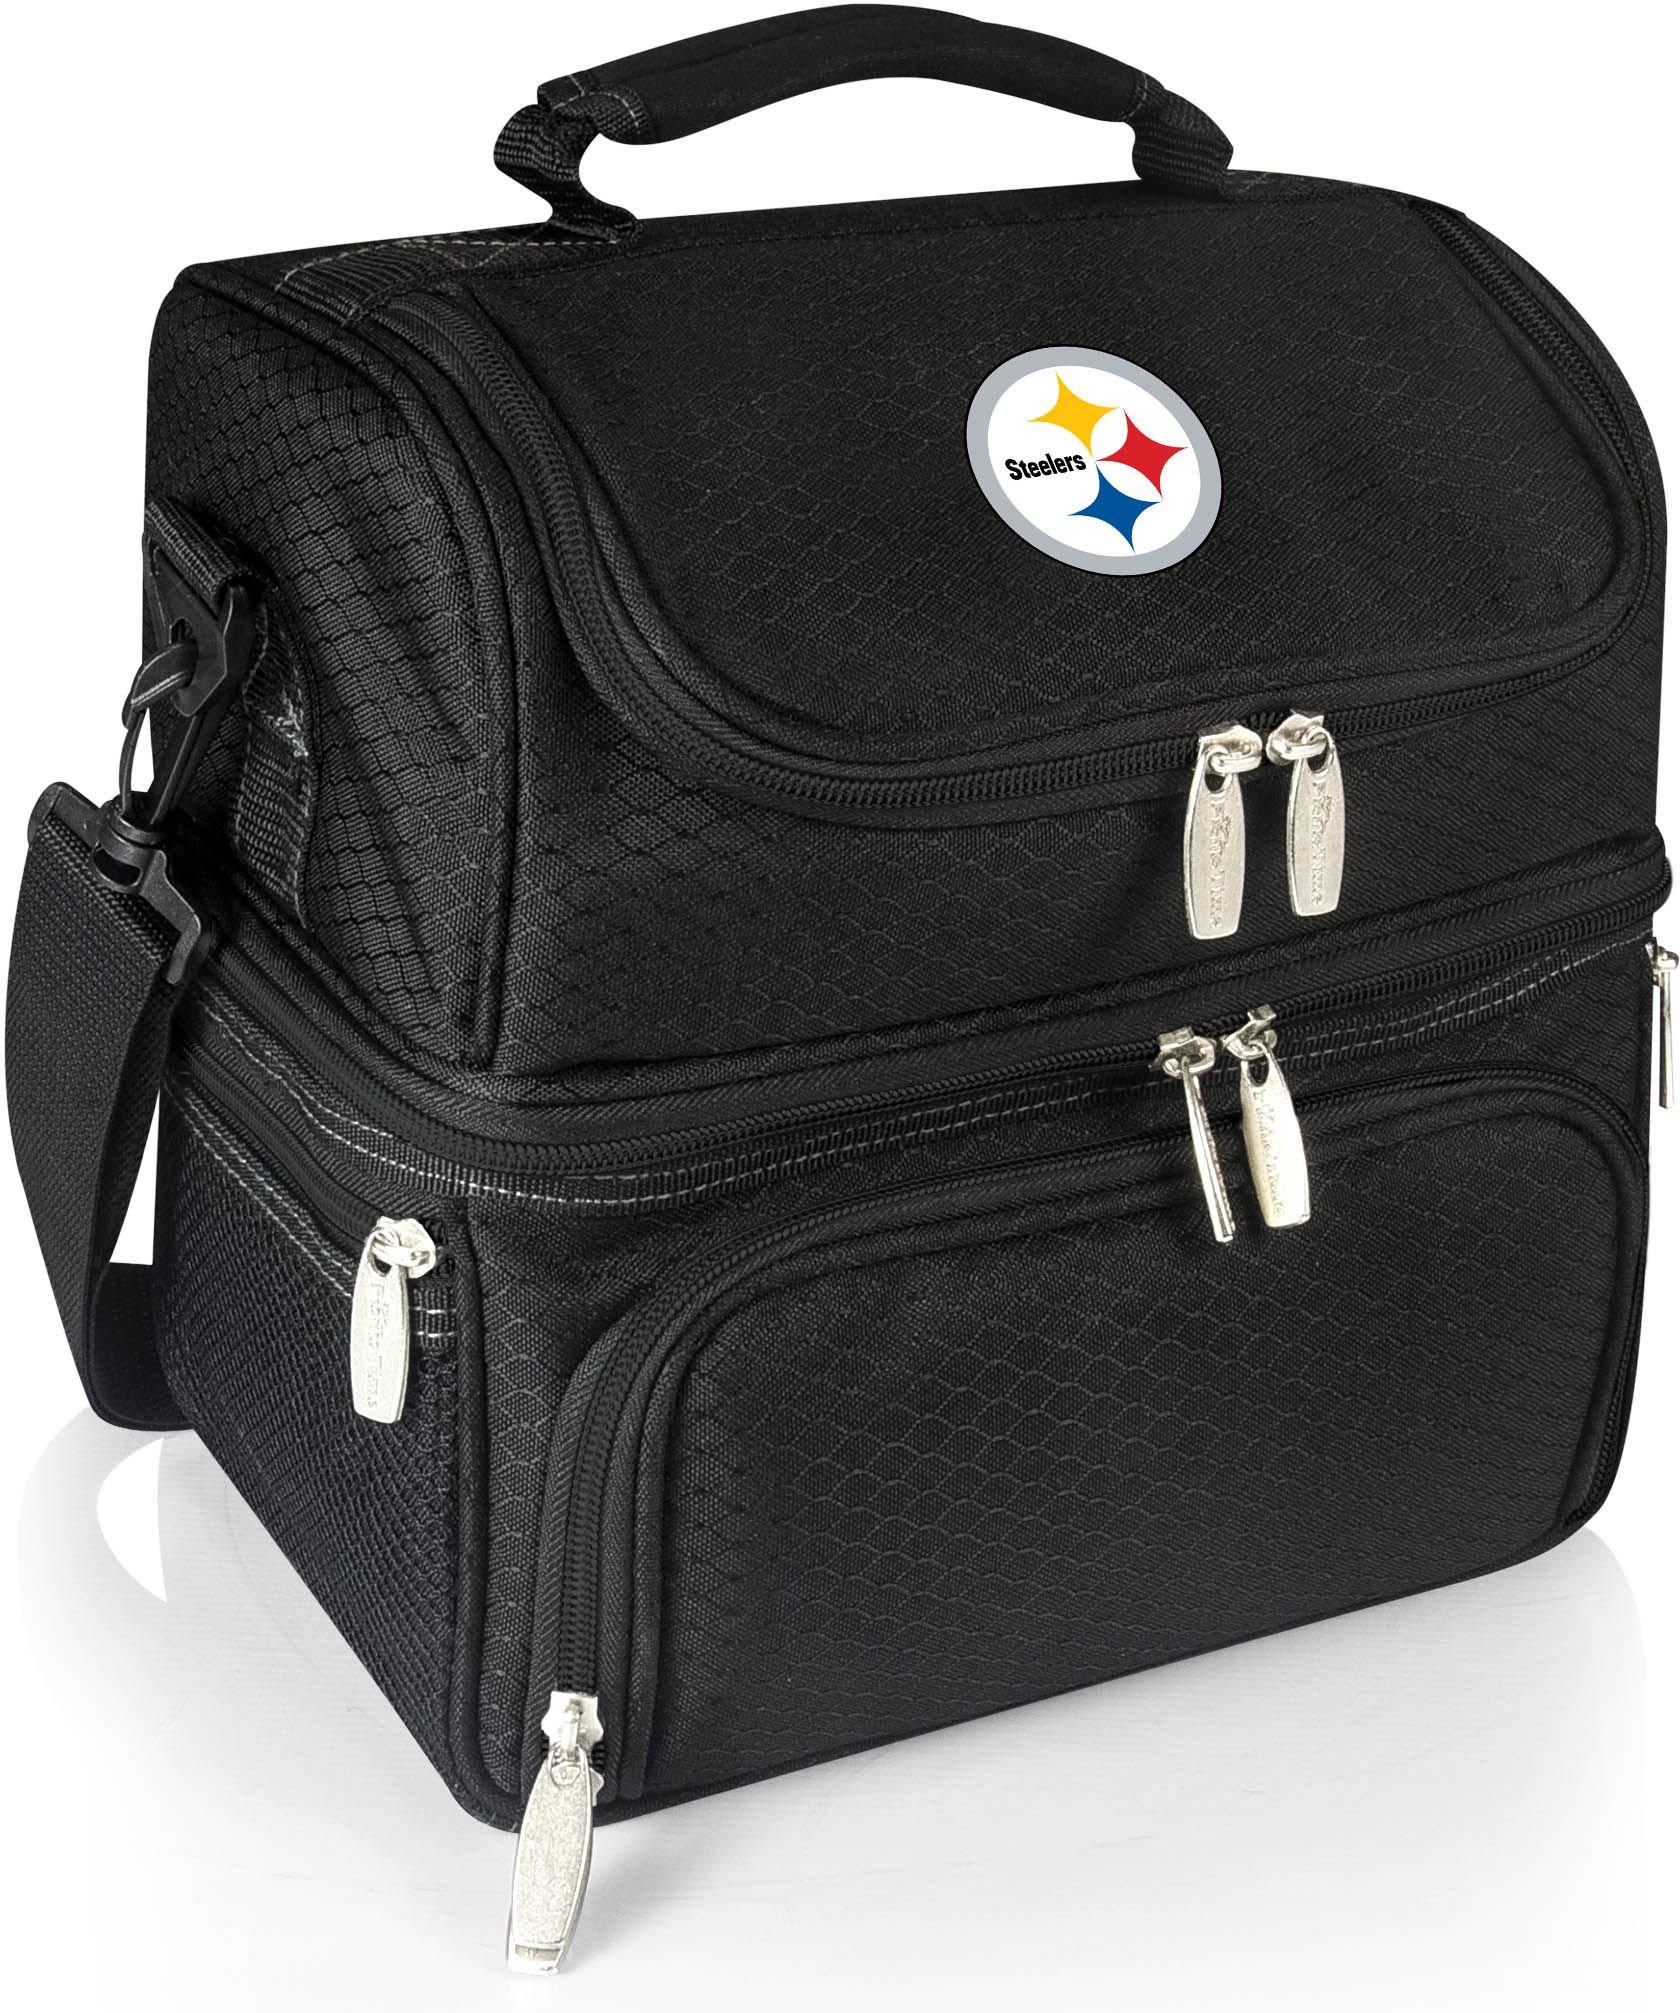 Pittsburgh Steelers Pranzo Tote by Oniva